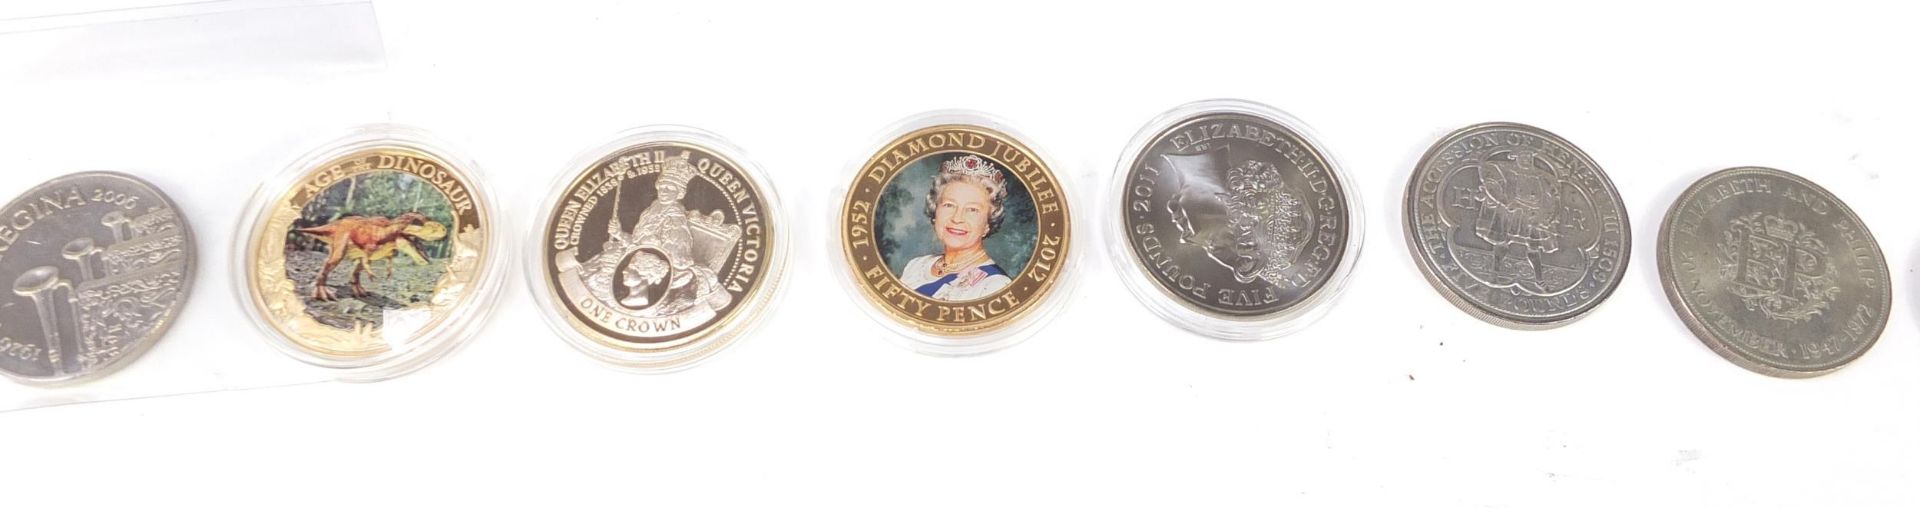 British commemorative coinage and tokens including five pound coins and Queen's Golden Jubilee - Image 5 of 7